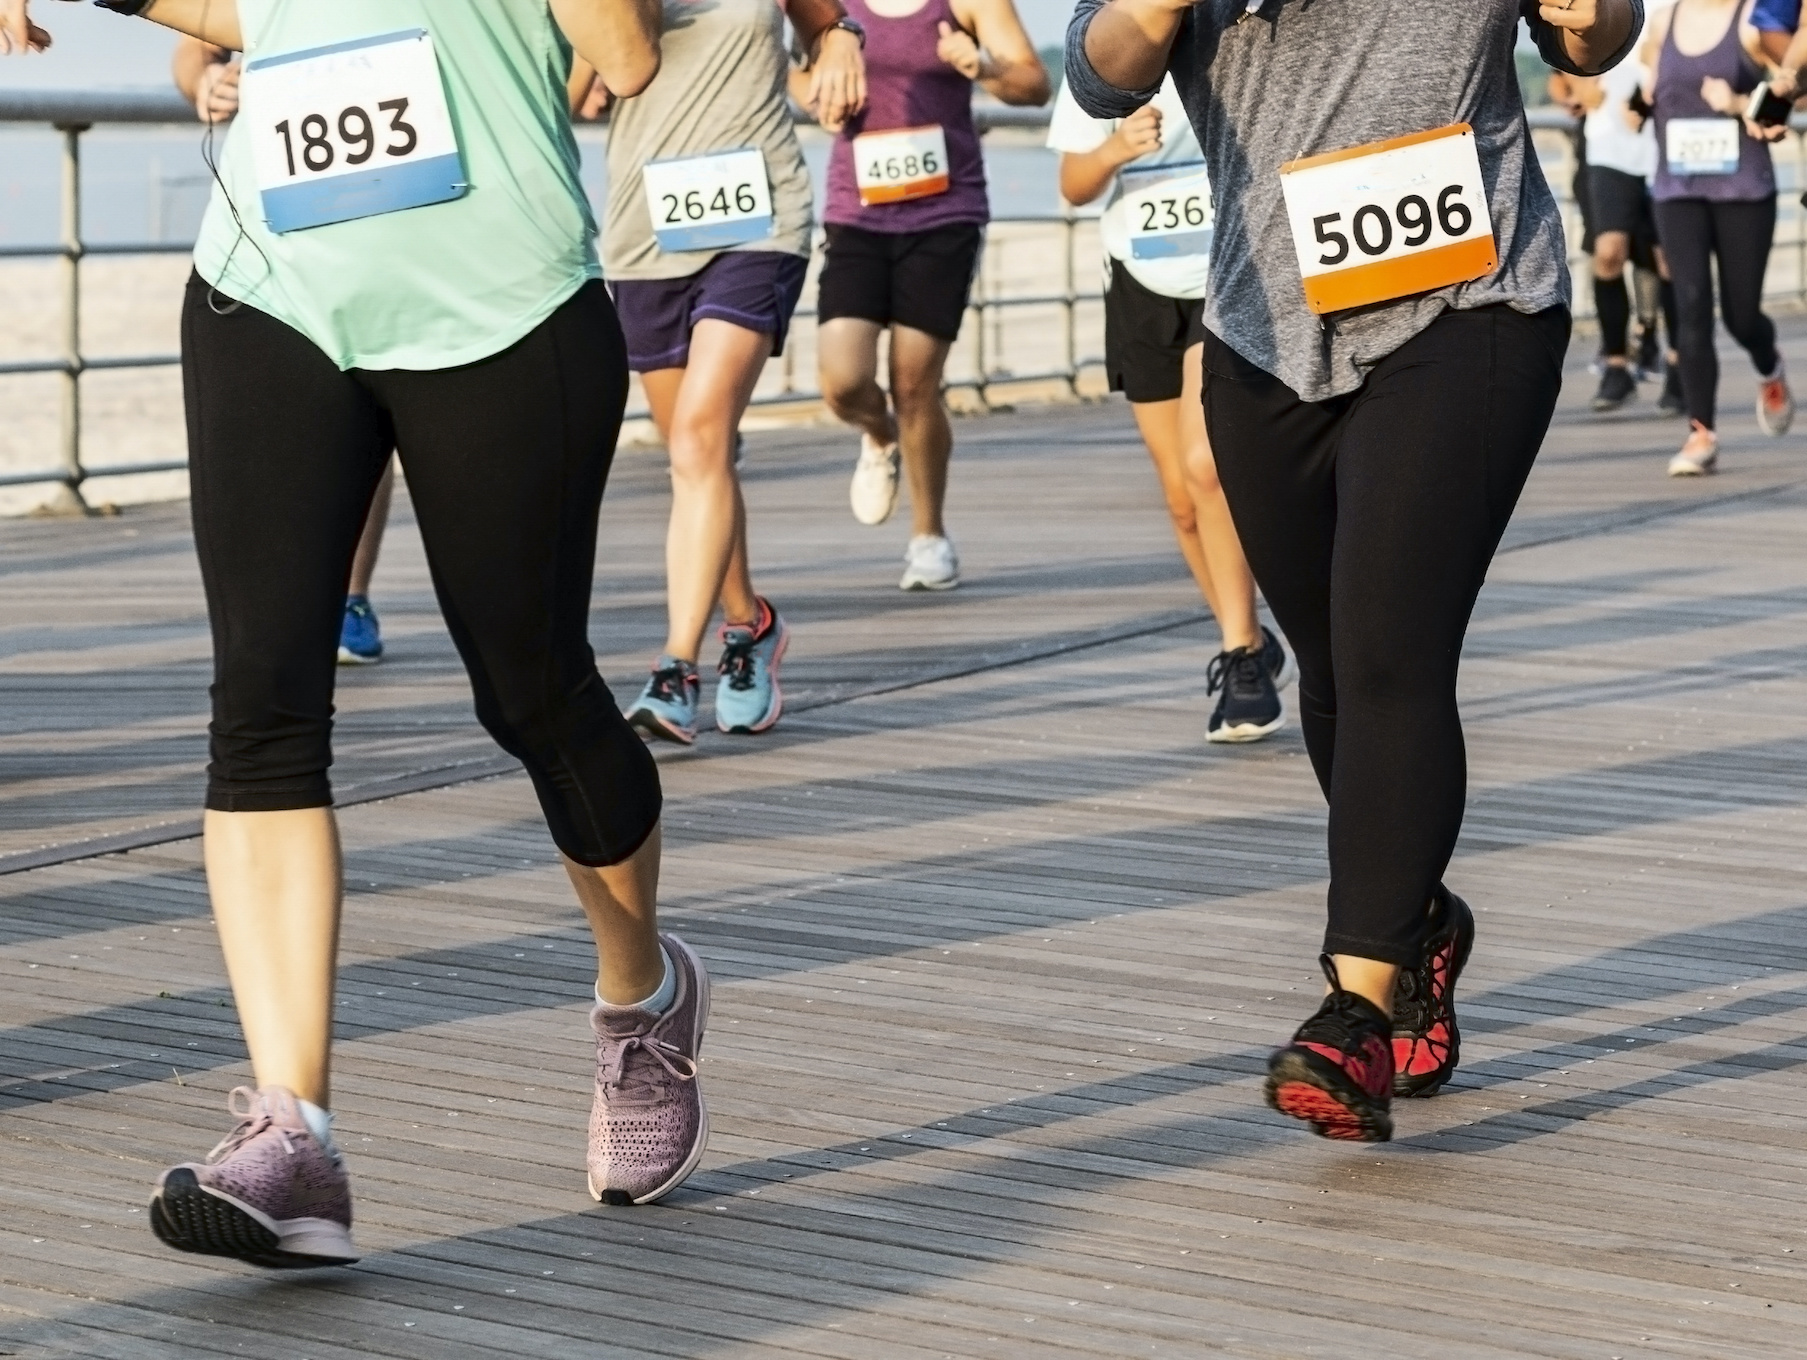 Many runners are running a race on a boardwalk by the beach shot from the waist down.